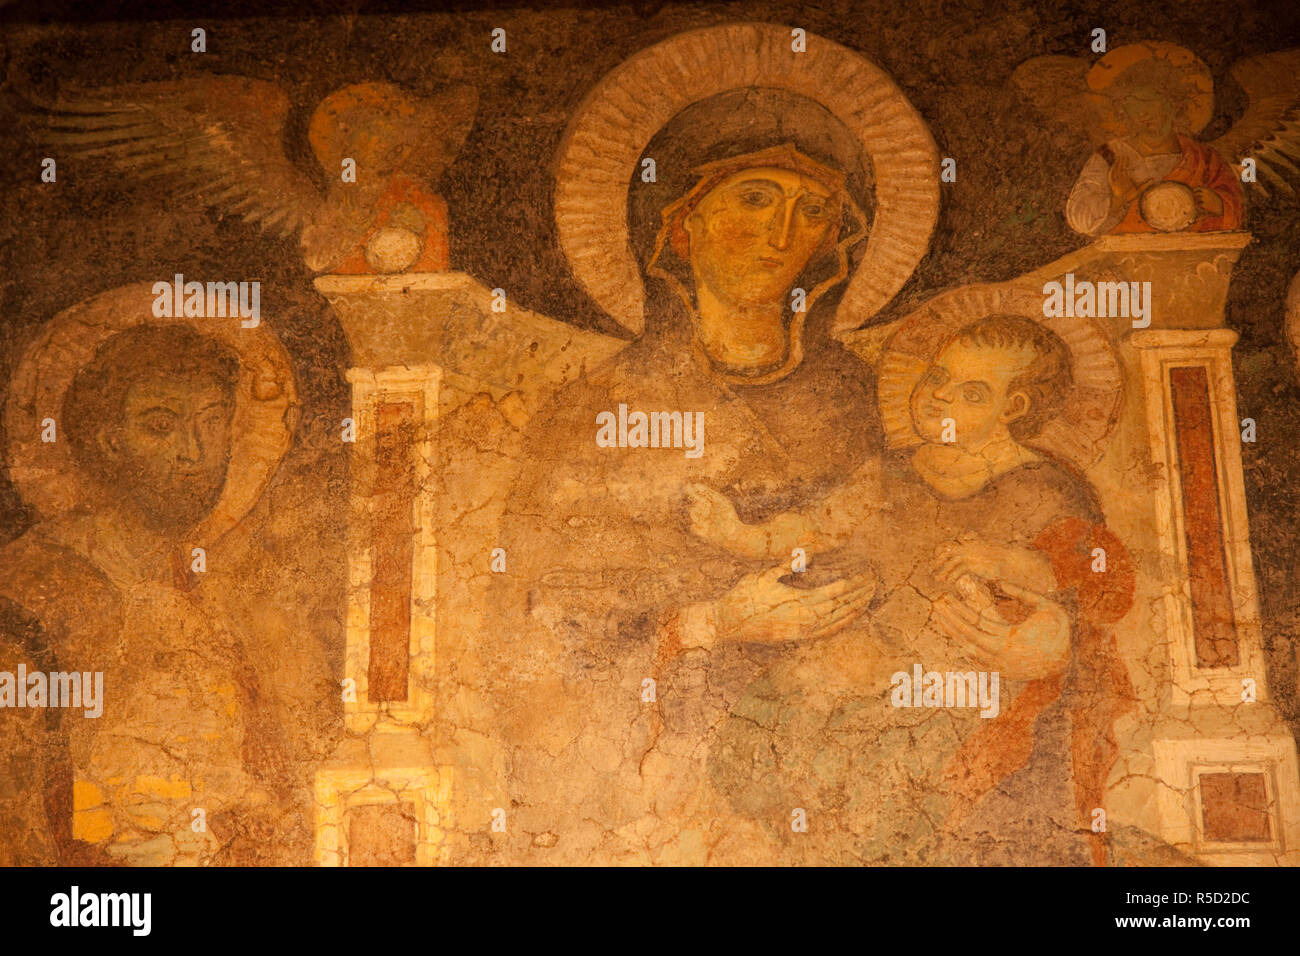 Italy, Rome, The Forum, Temple of Romulus, Early Christian Mural depicting Madonna with Baby Jesus Stock Photo